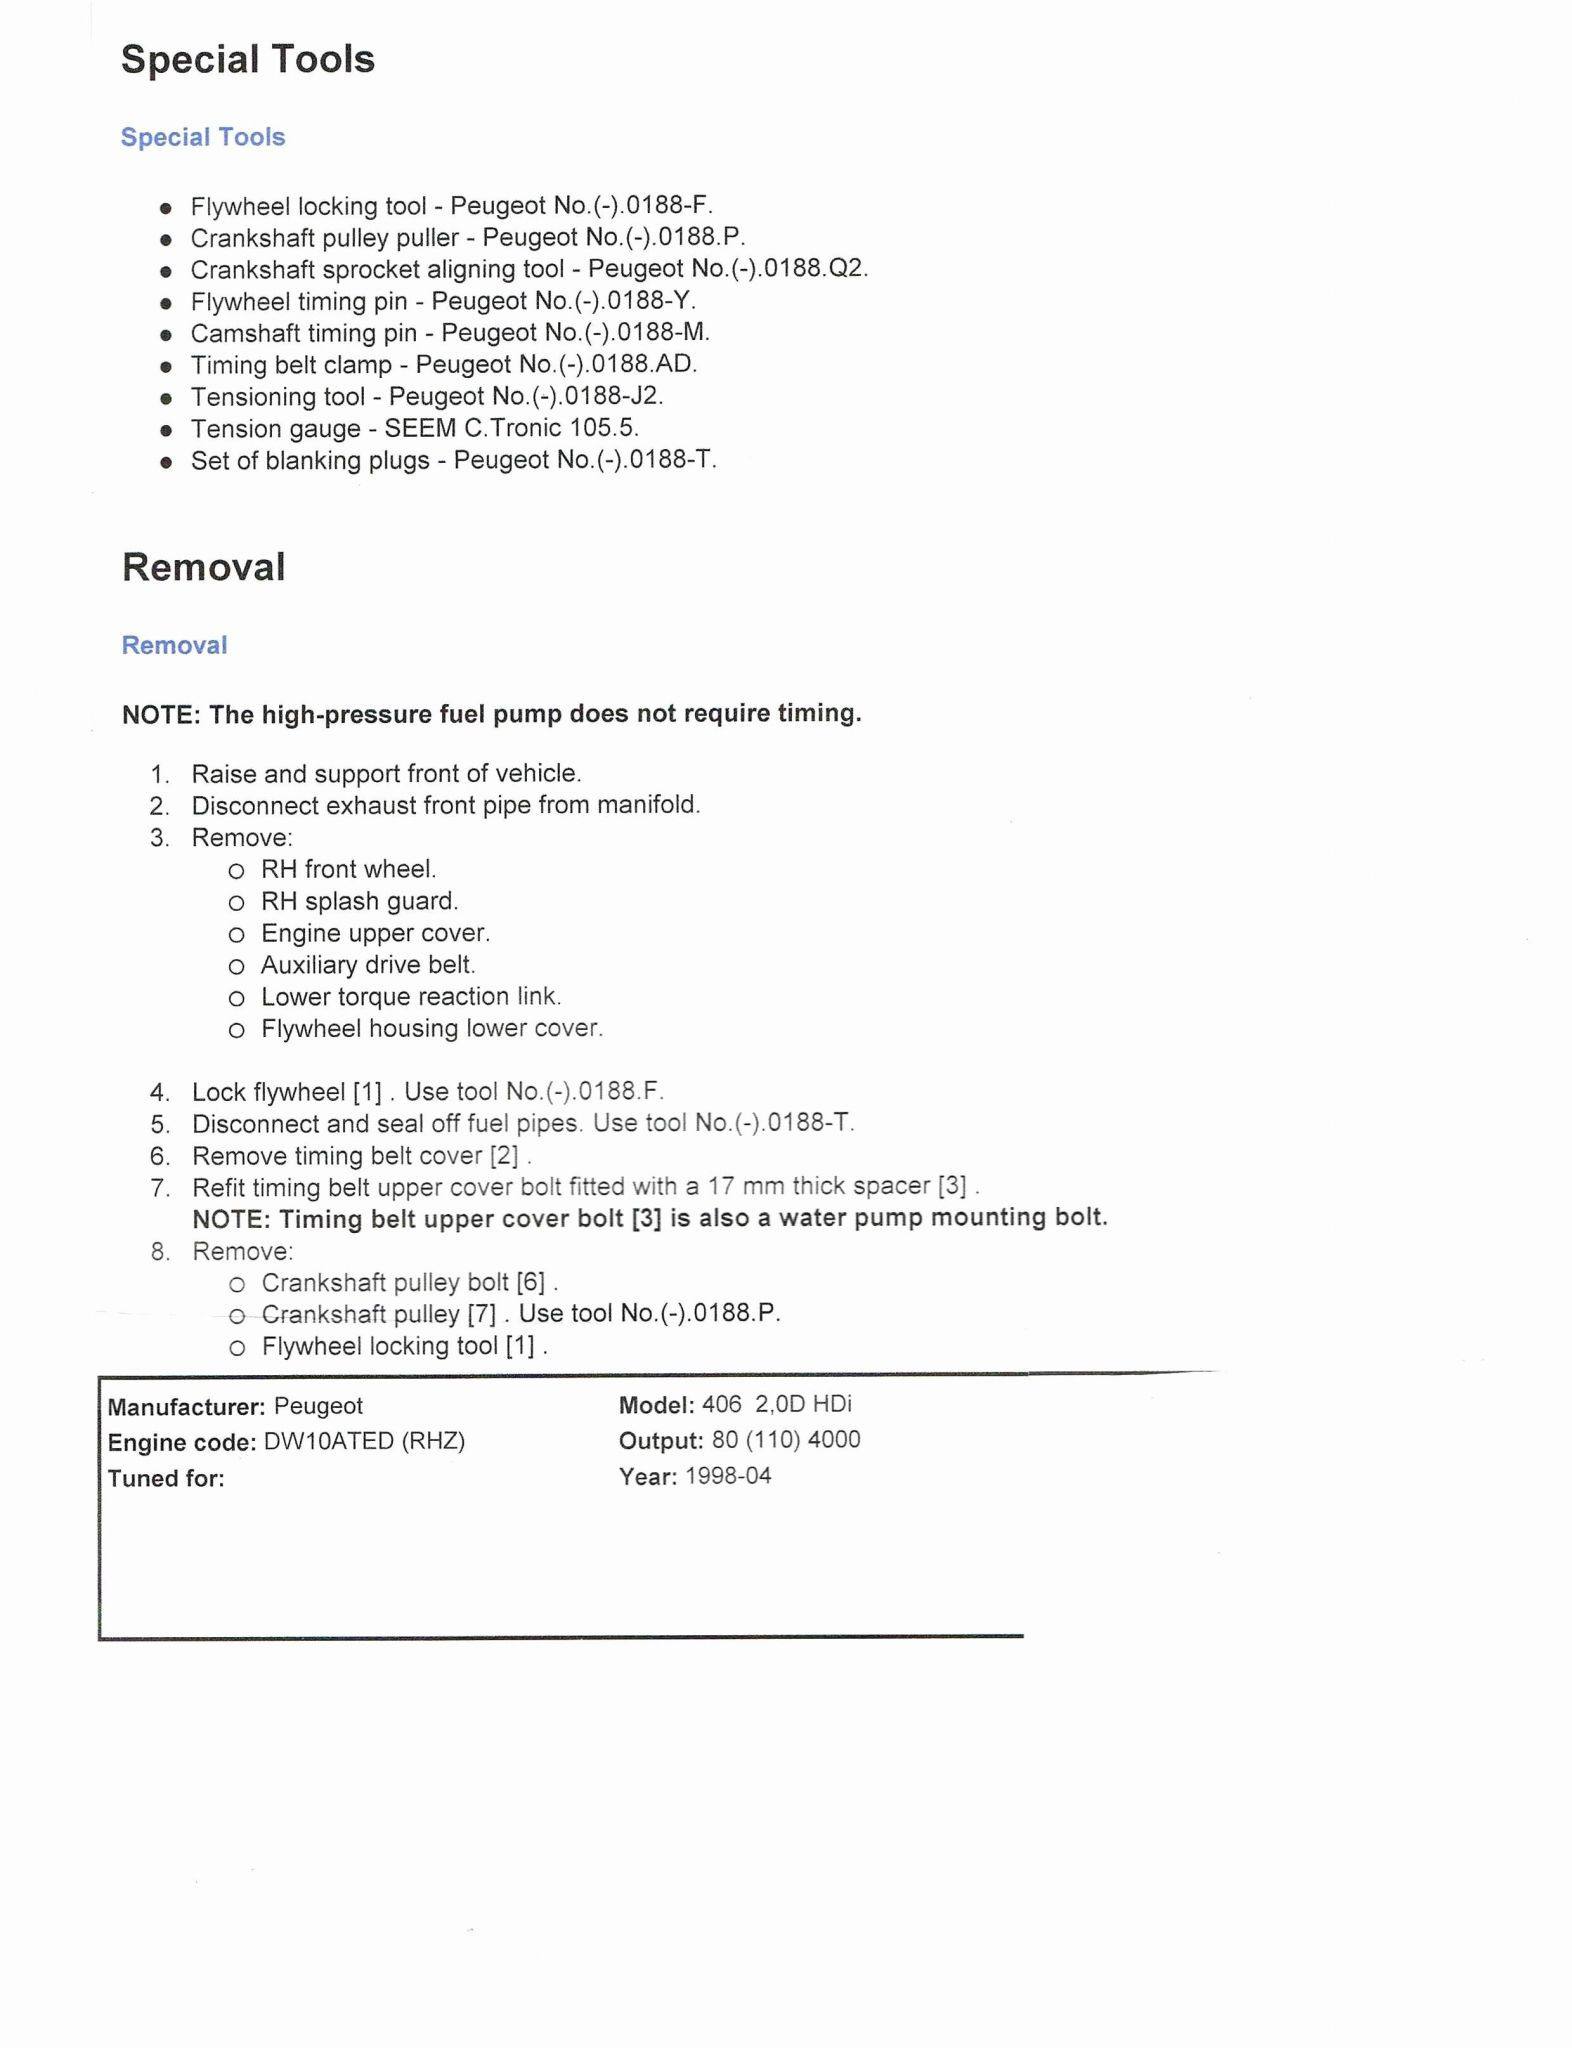 Scholarship Coach Search Profile Worksheet